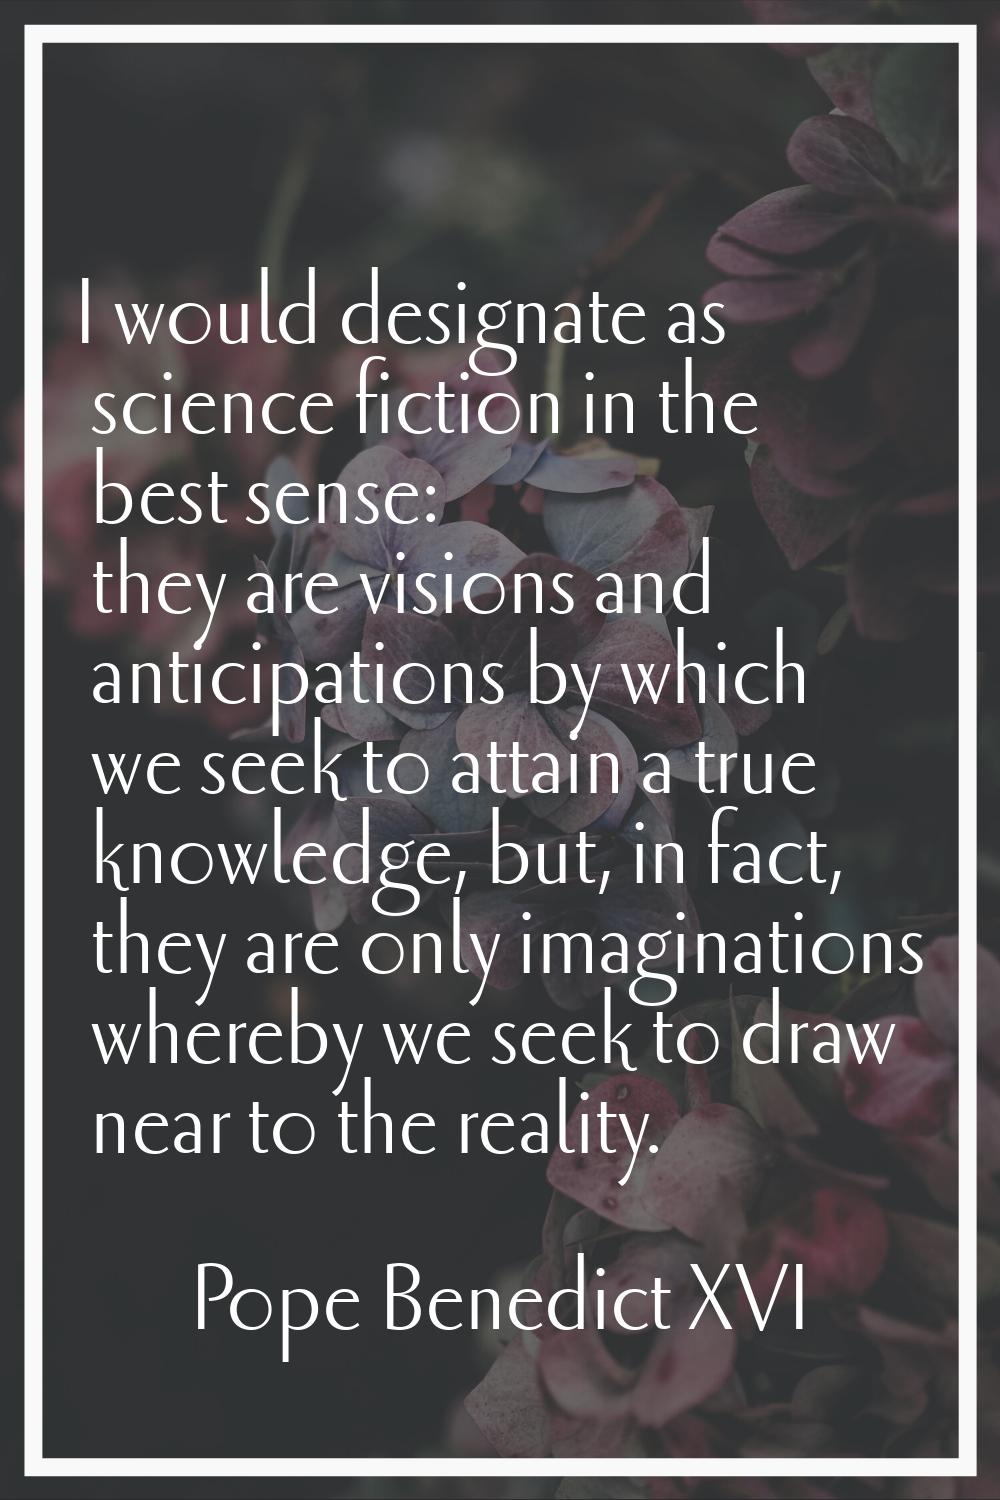 I would designate as science fiction in the best sense: they are visions and anticipations by which